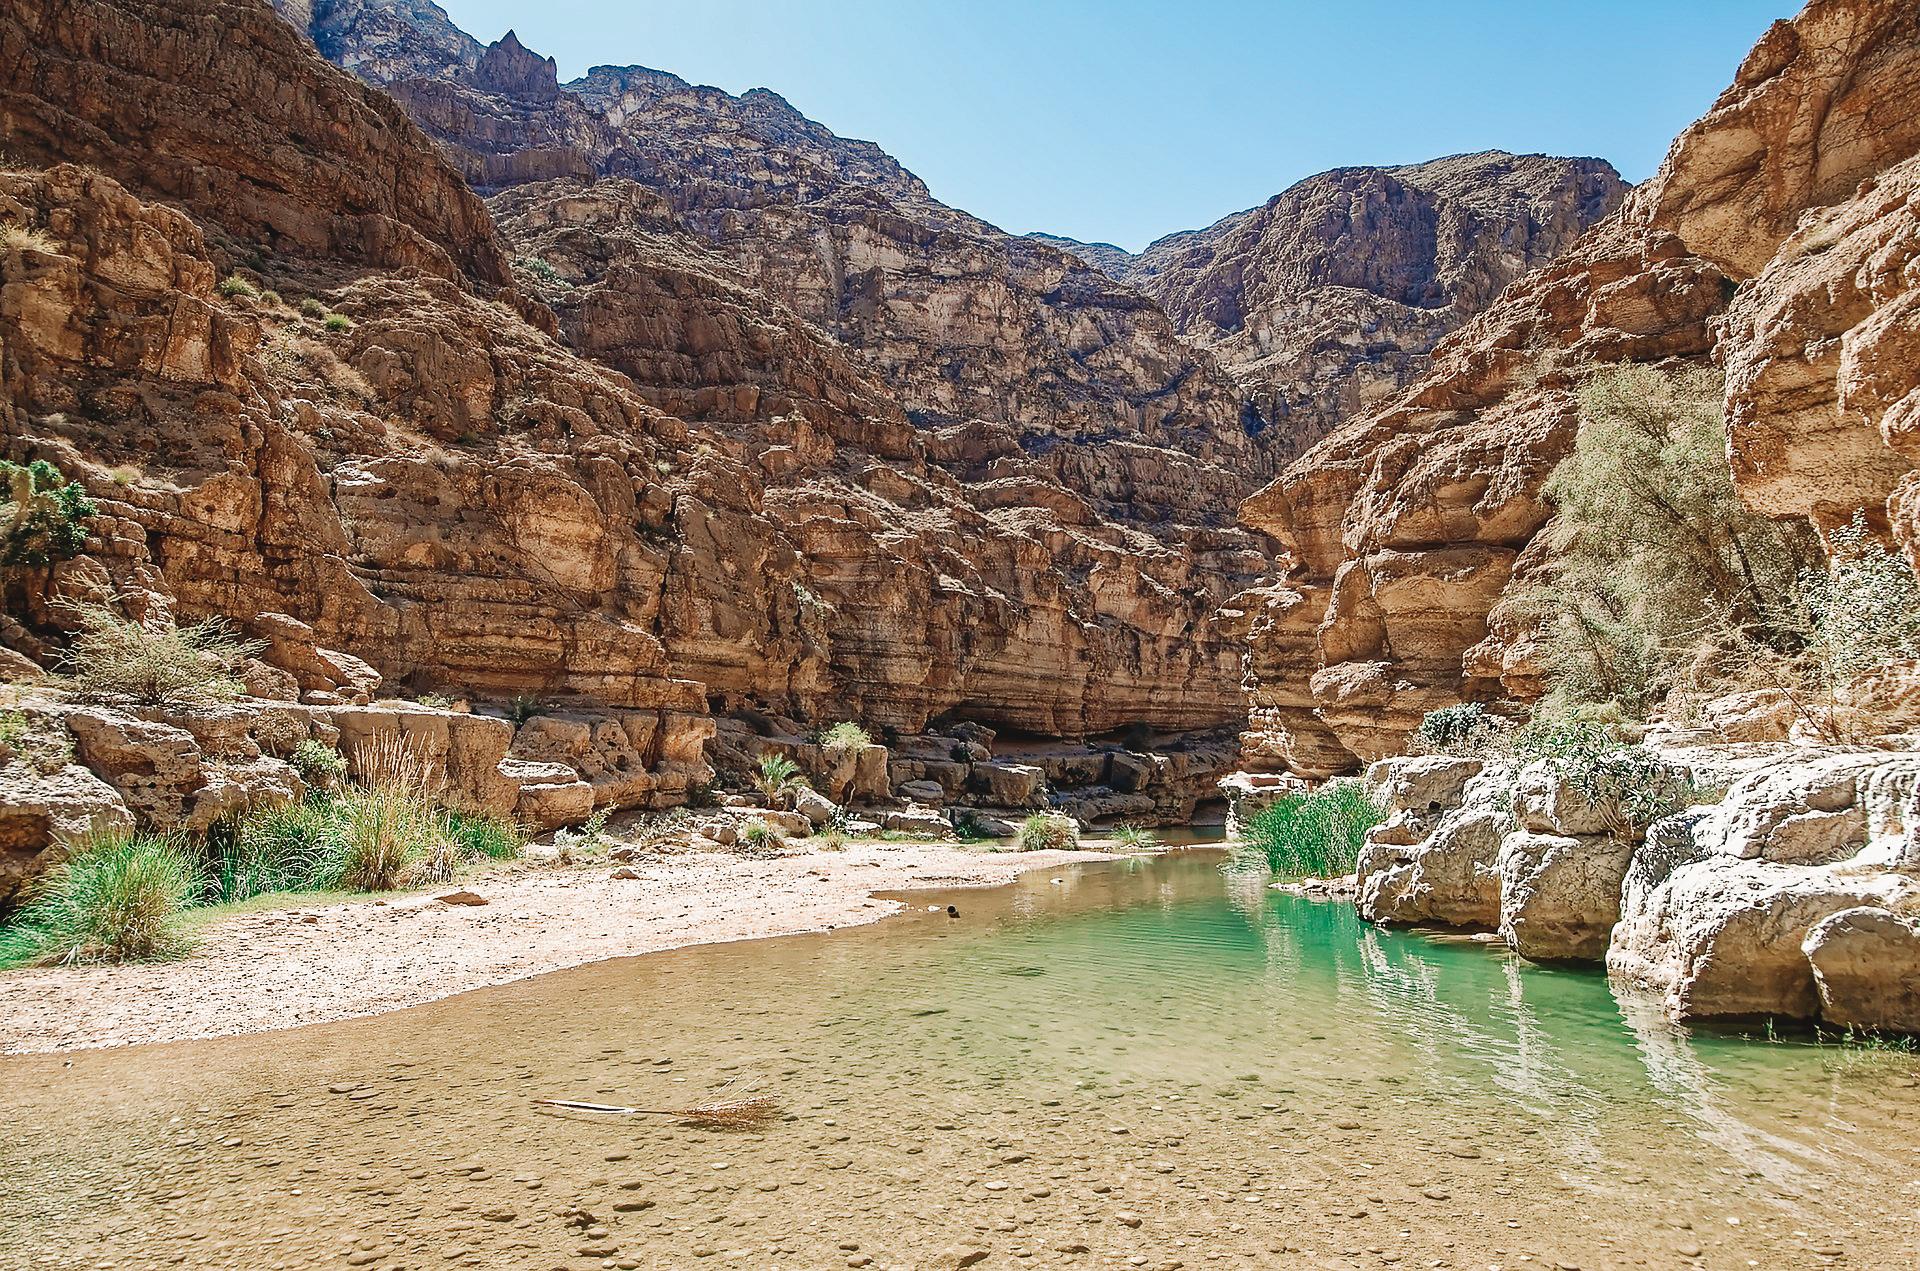 Wadi Shab, a rocky valley with swimming pools in Oman